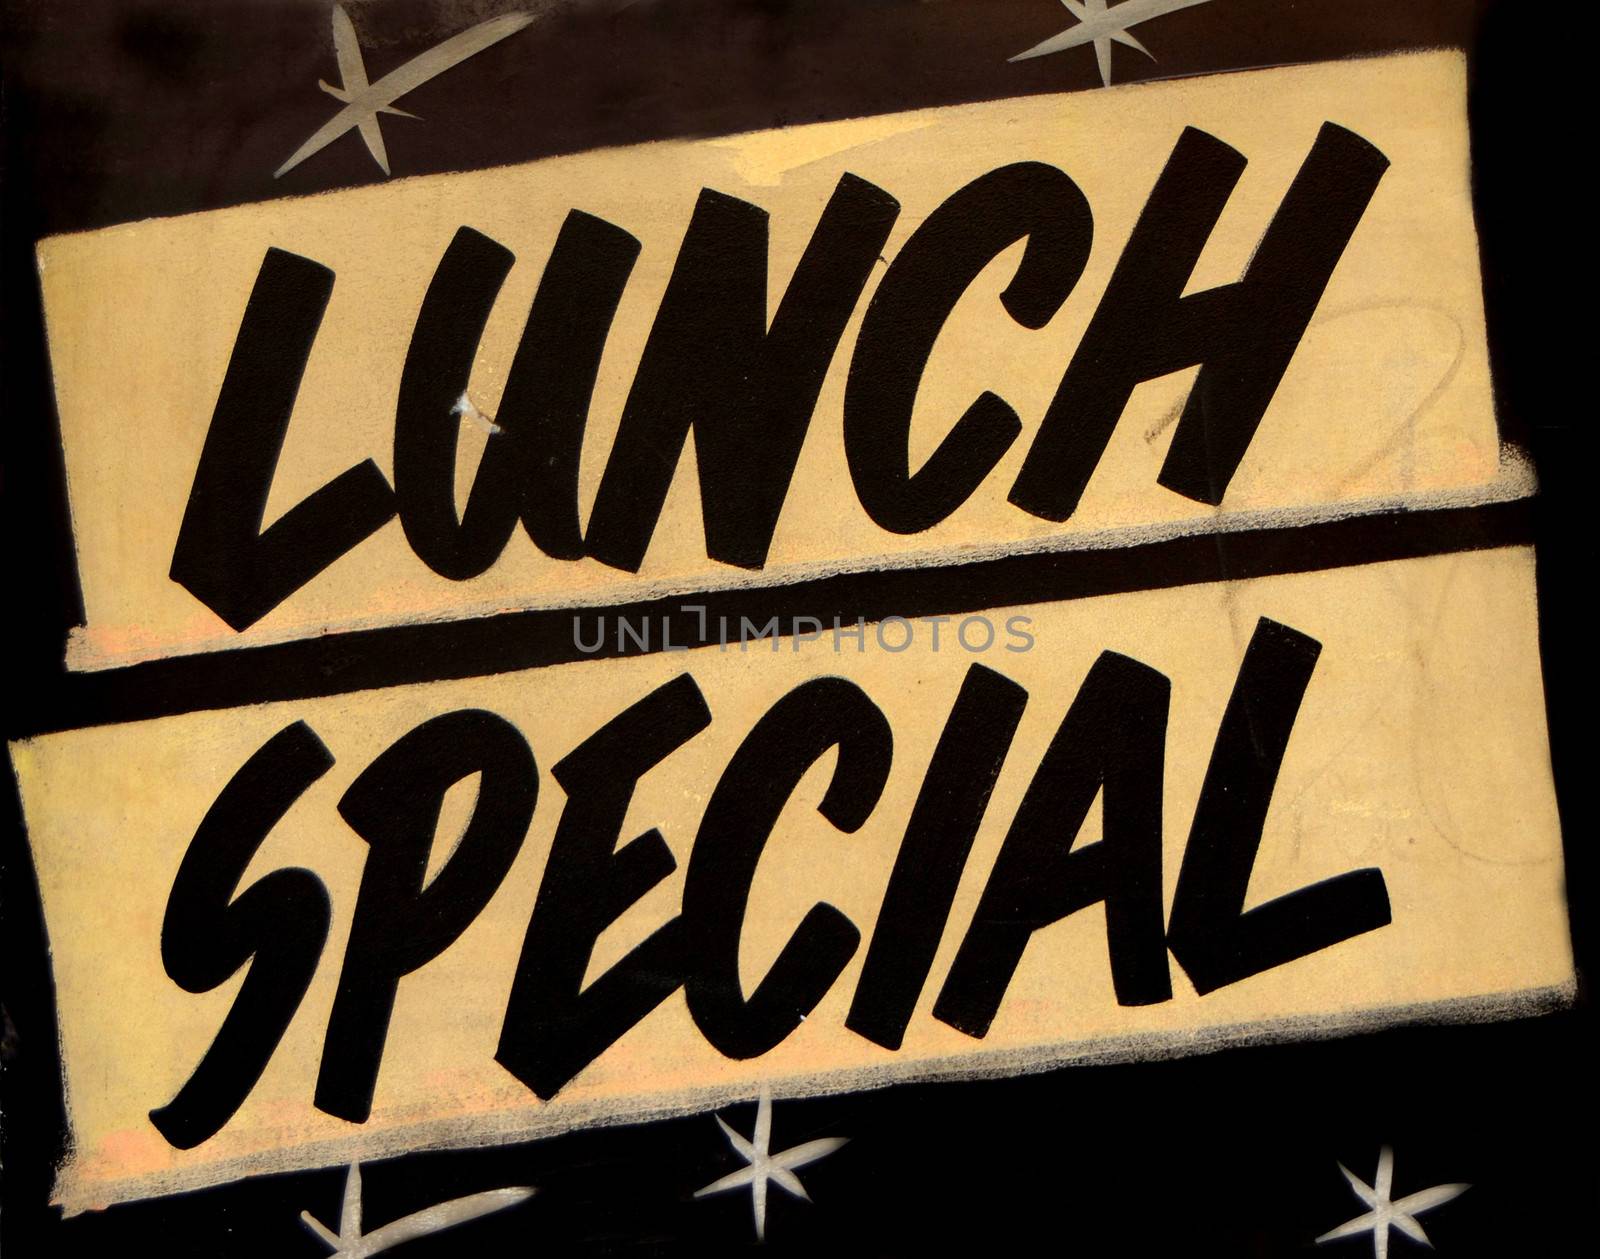 A Grungy Lunch Special Sign In A Cafe Or Restaurant